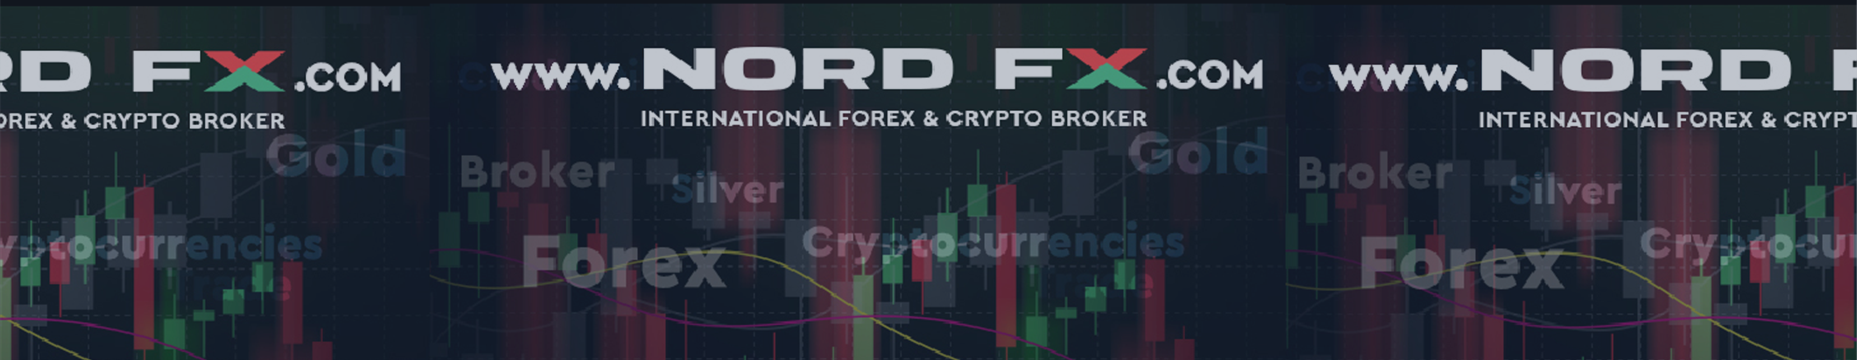 Forex Forecast and Cryptocurrency Forecast for November 30 - December 04, 2020